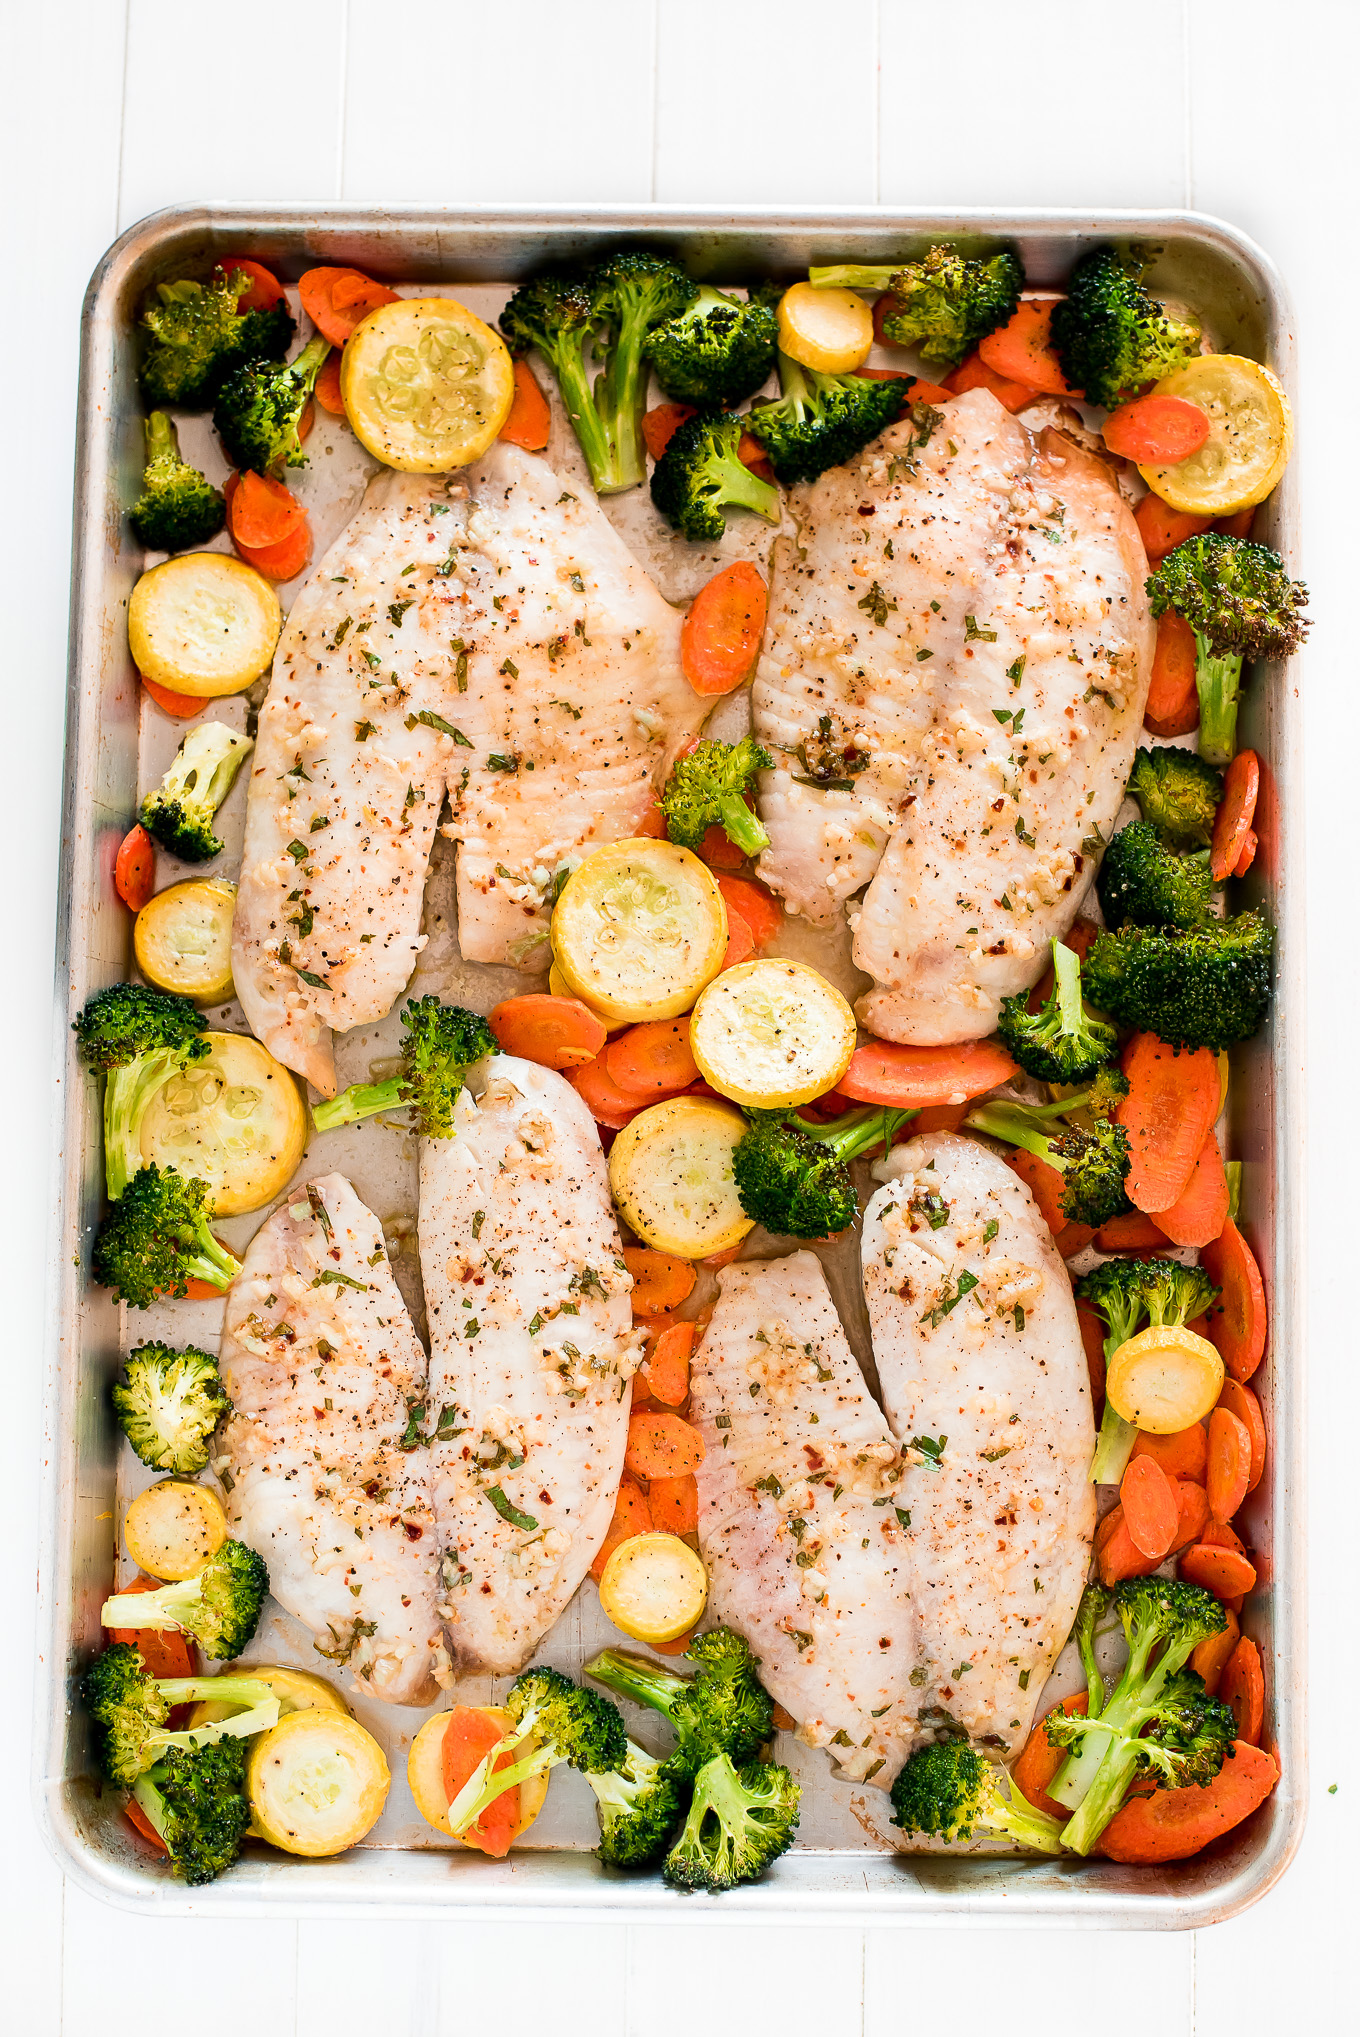 Four baked tilapia fillets and vegetables on a sheet pan.